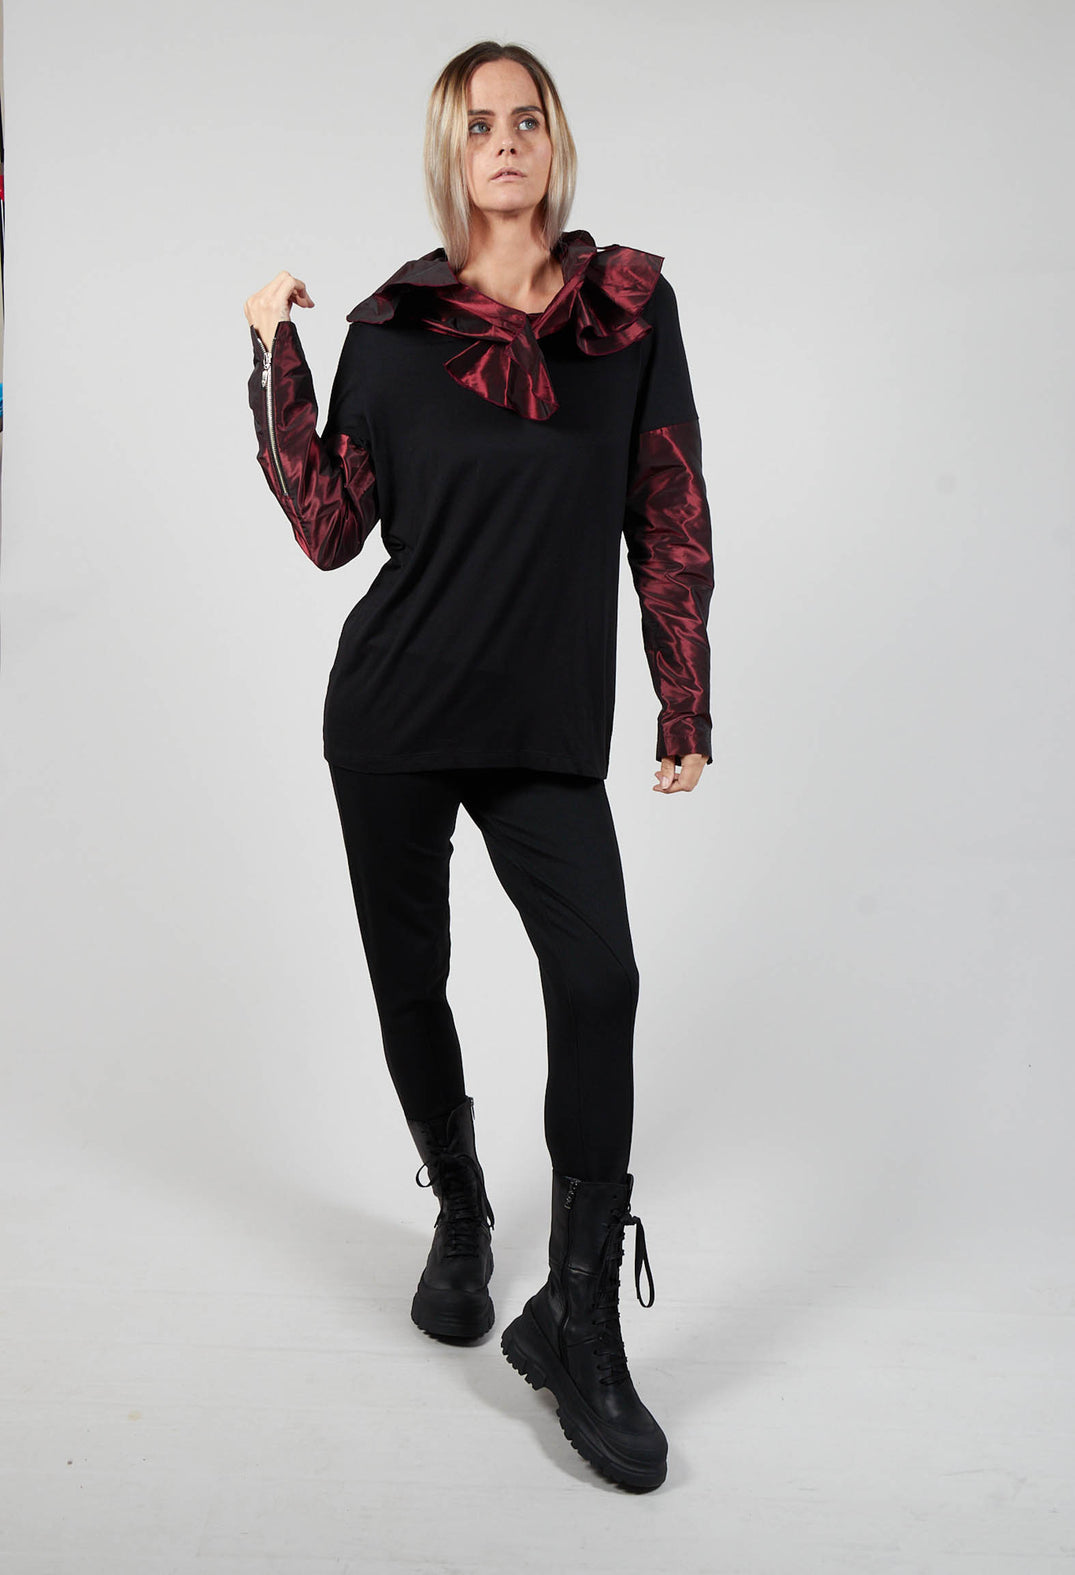 Jersey Top with Contrasting Sleeves and Neck in Black and Burgundy